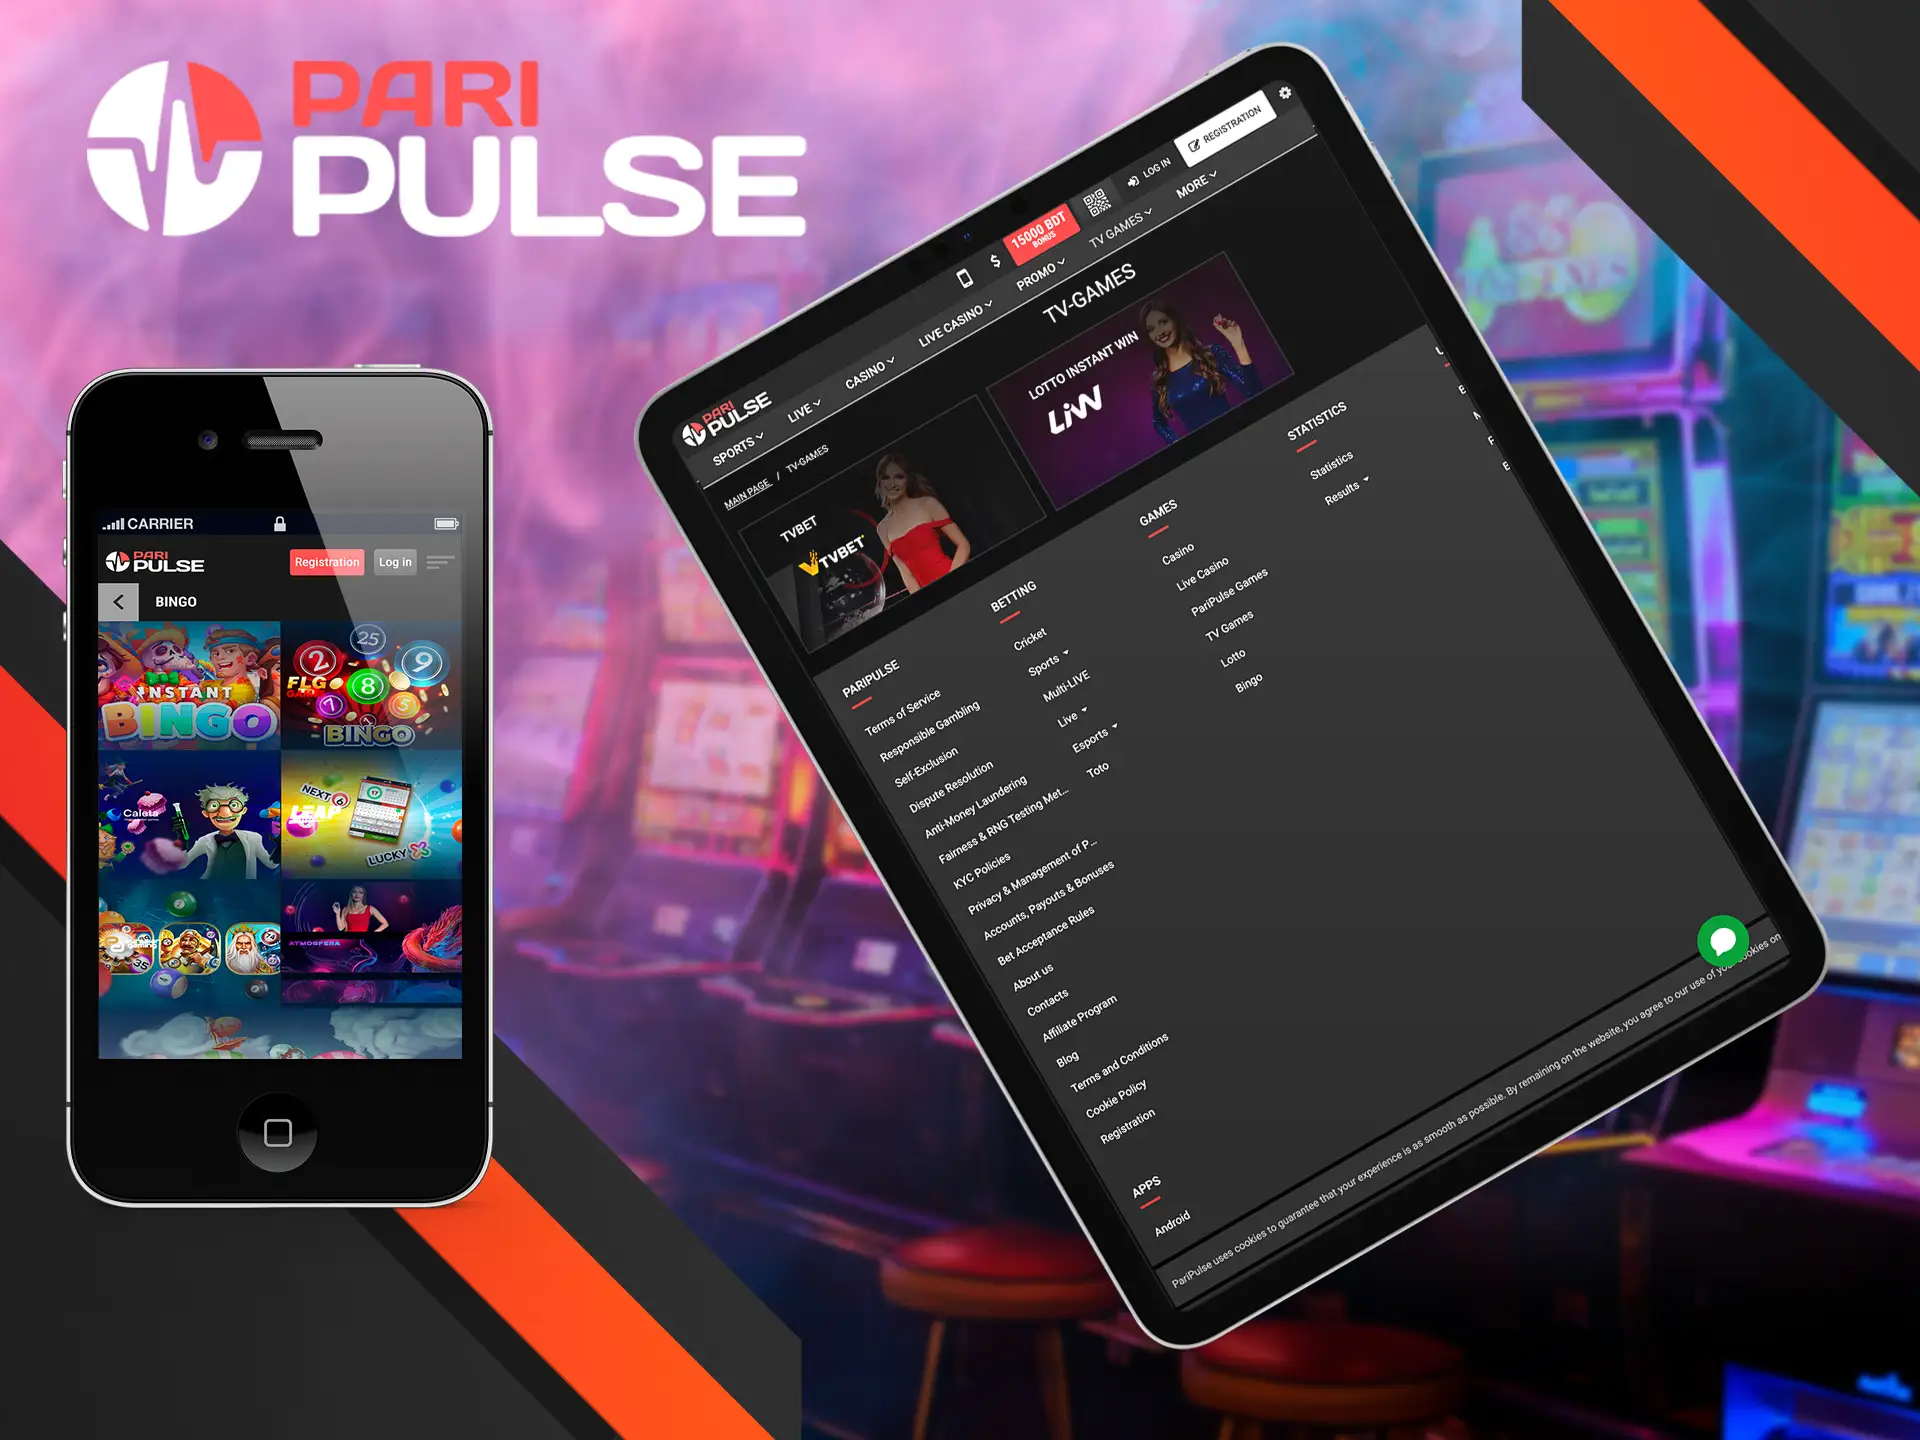 We made sure that the application PariPulse works perfectly on most Apple devices, so we can recommend you to download.